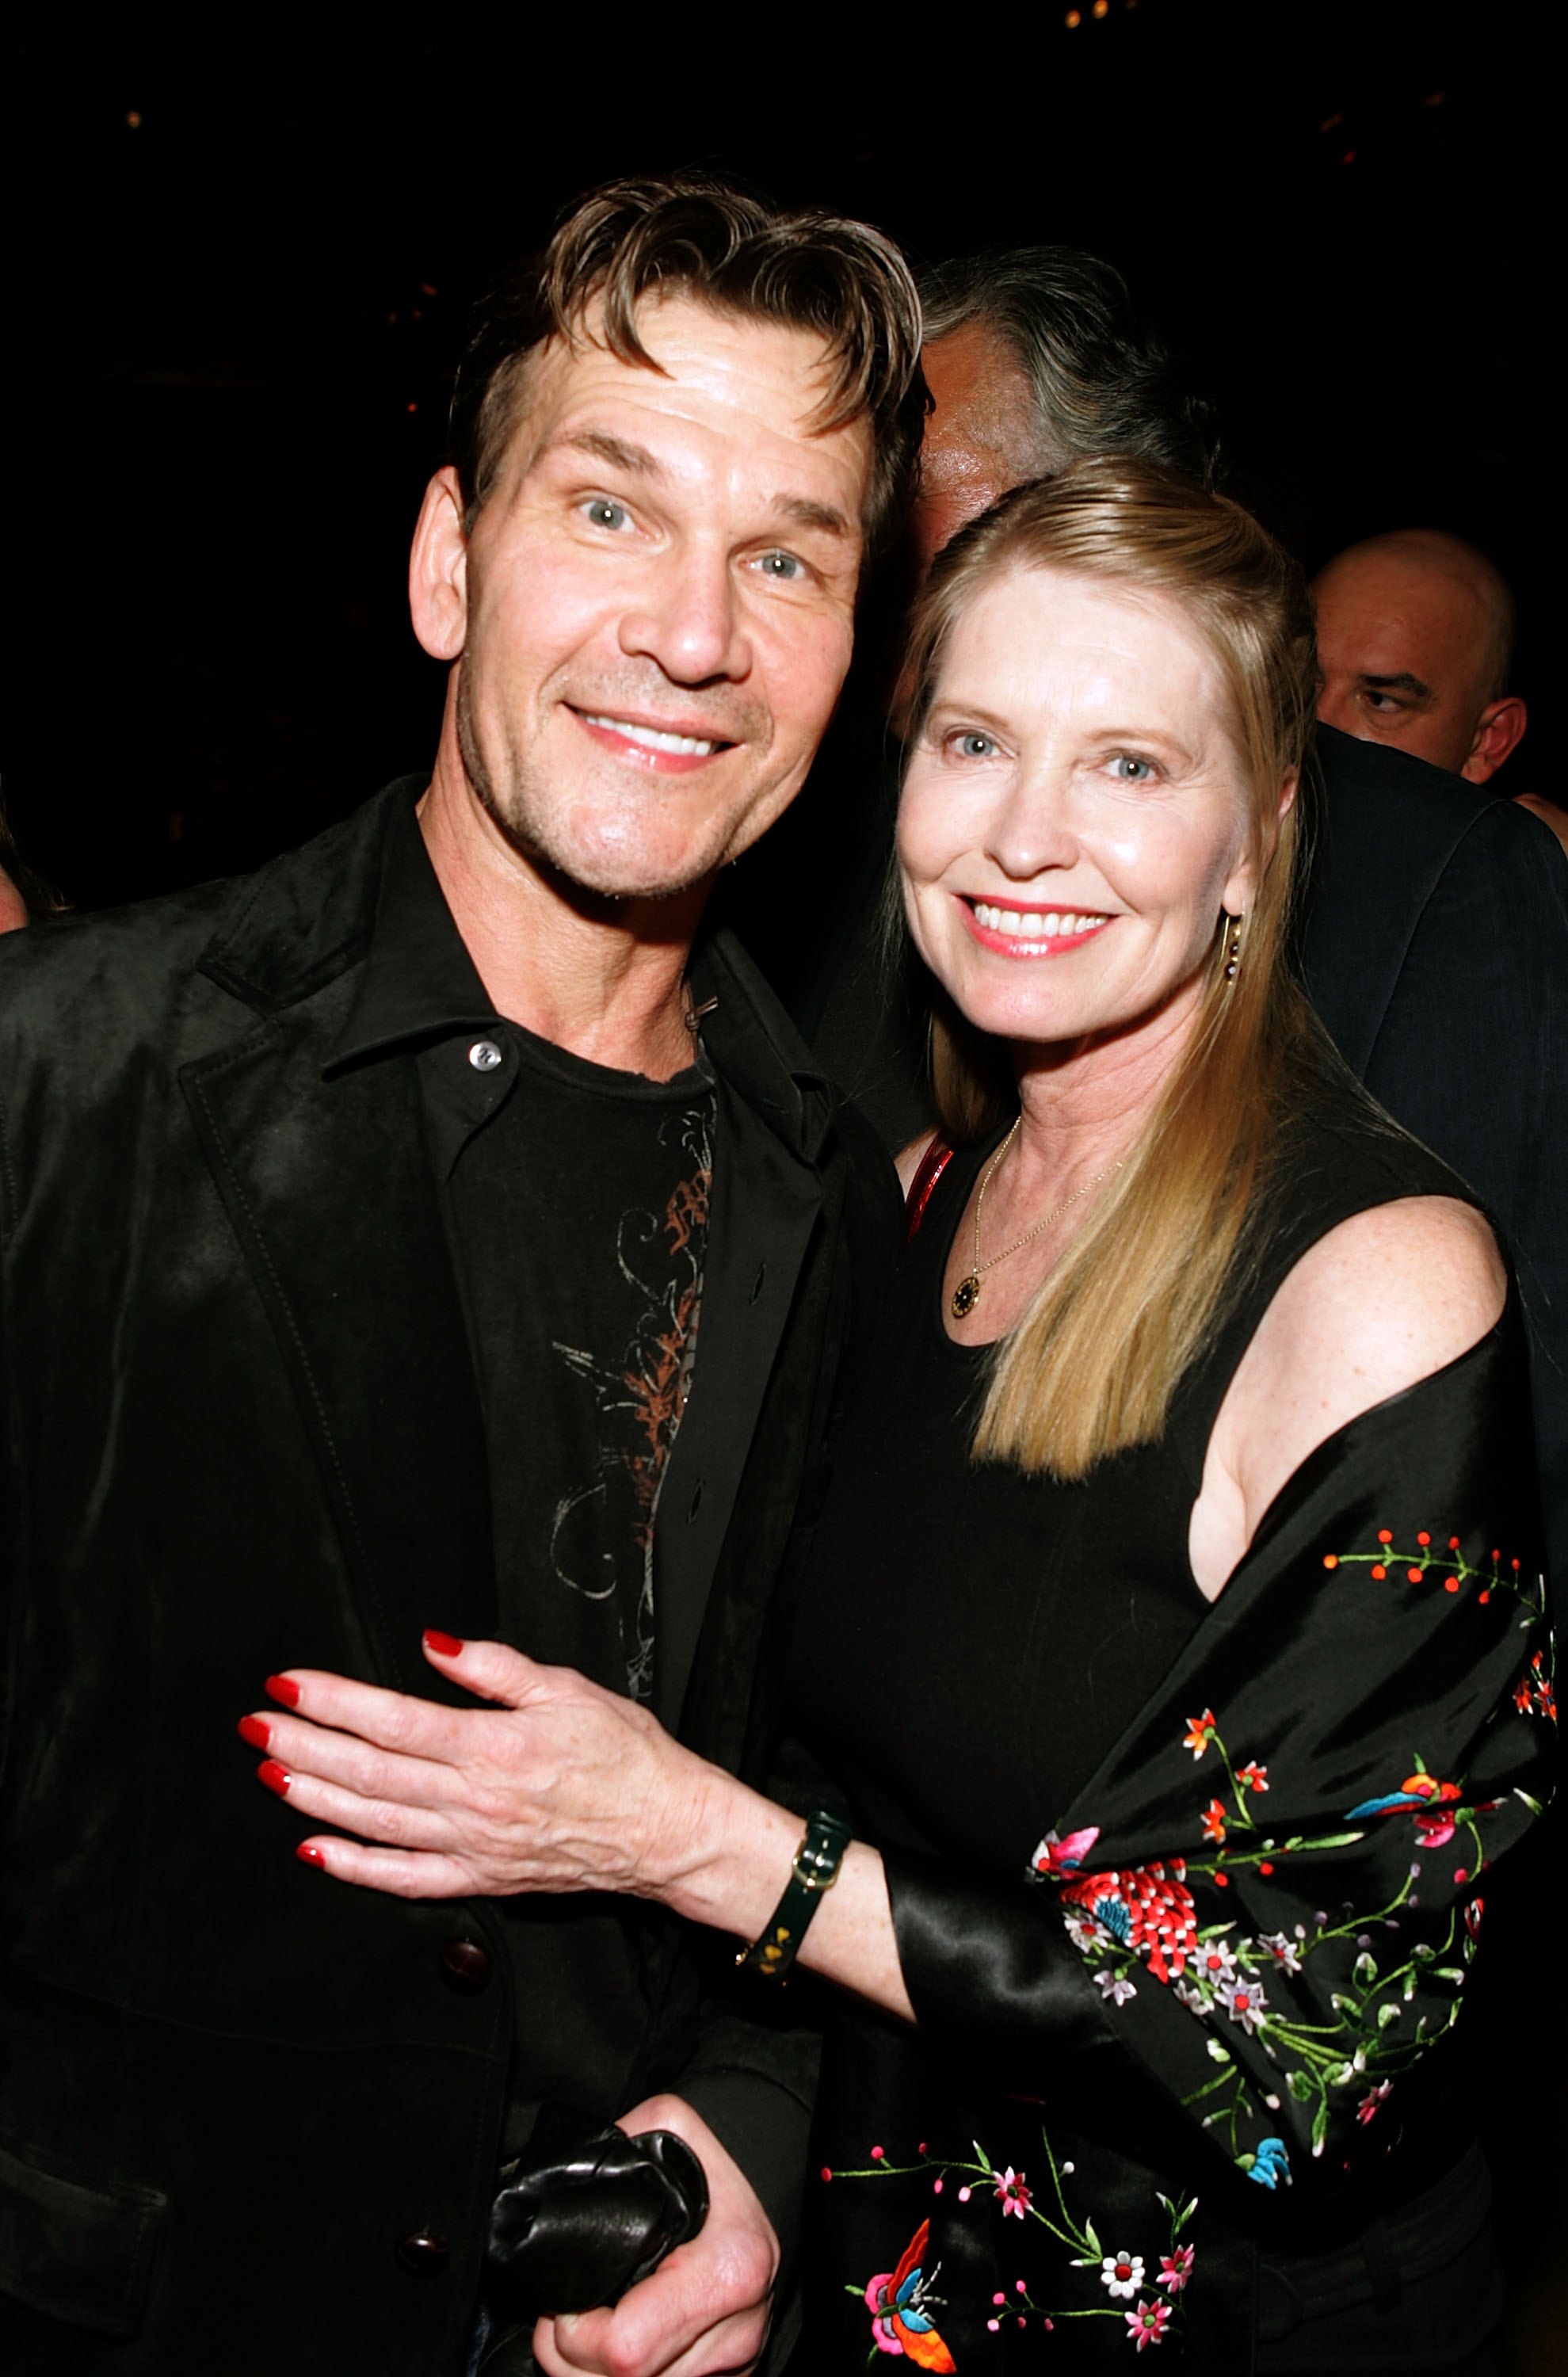 Actor Patrick Swayze and wife Lisa Niemi, pose at the premiere of MGM's "Rocky Balboa" after party held at the Hollywood and Highland Ballroom, on December 13, 2006 in Hollywood, California | Source: Getty Images